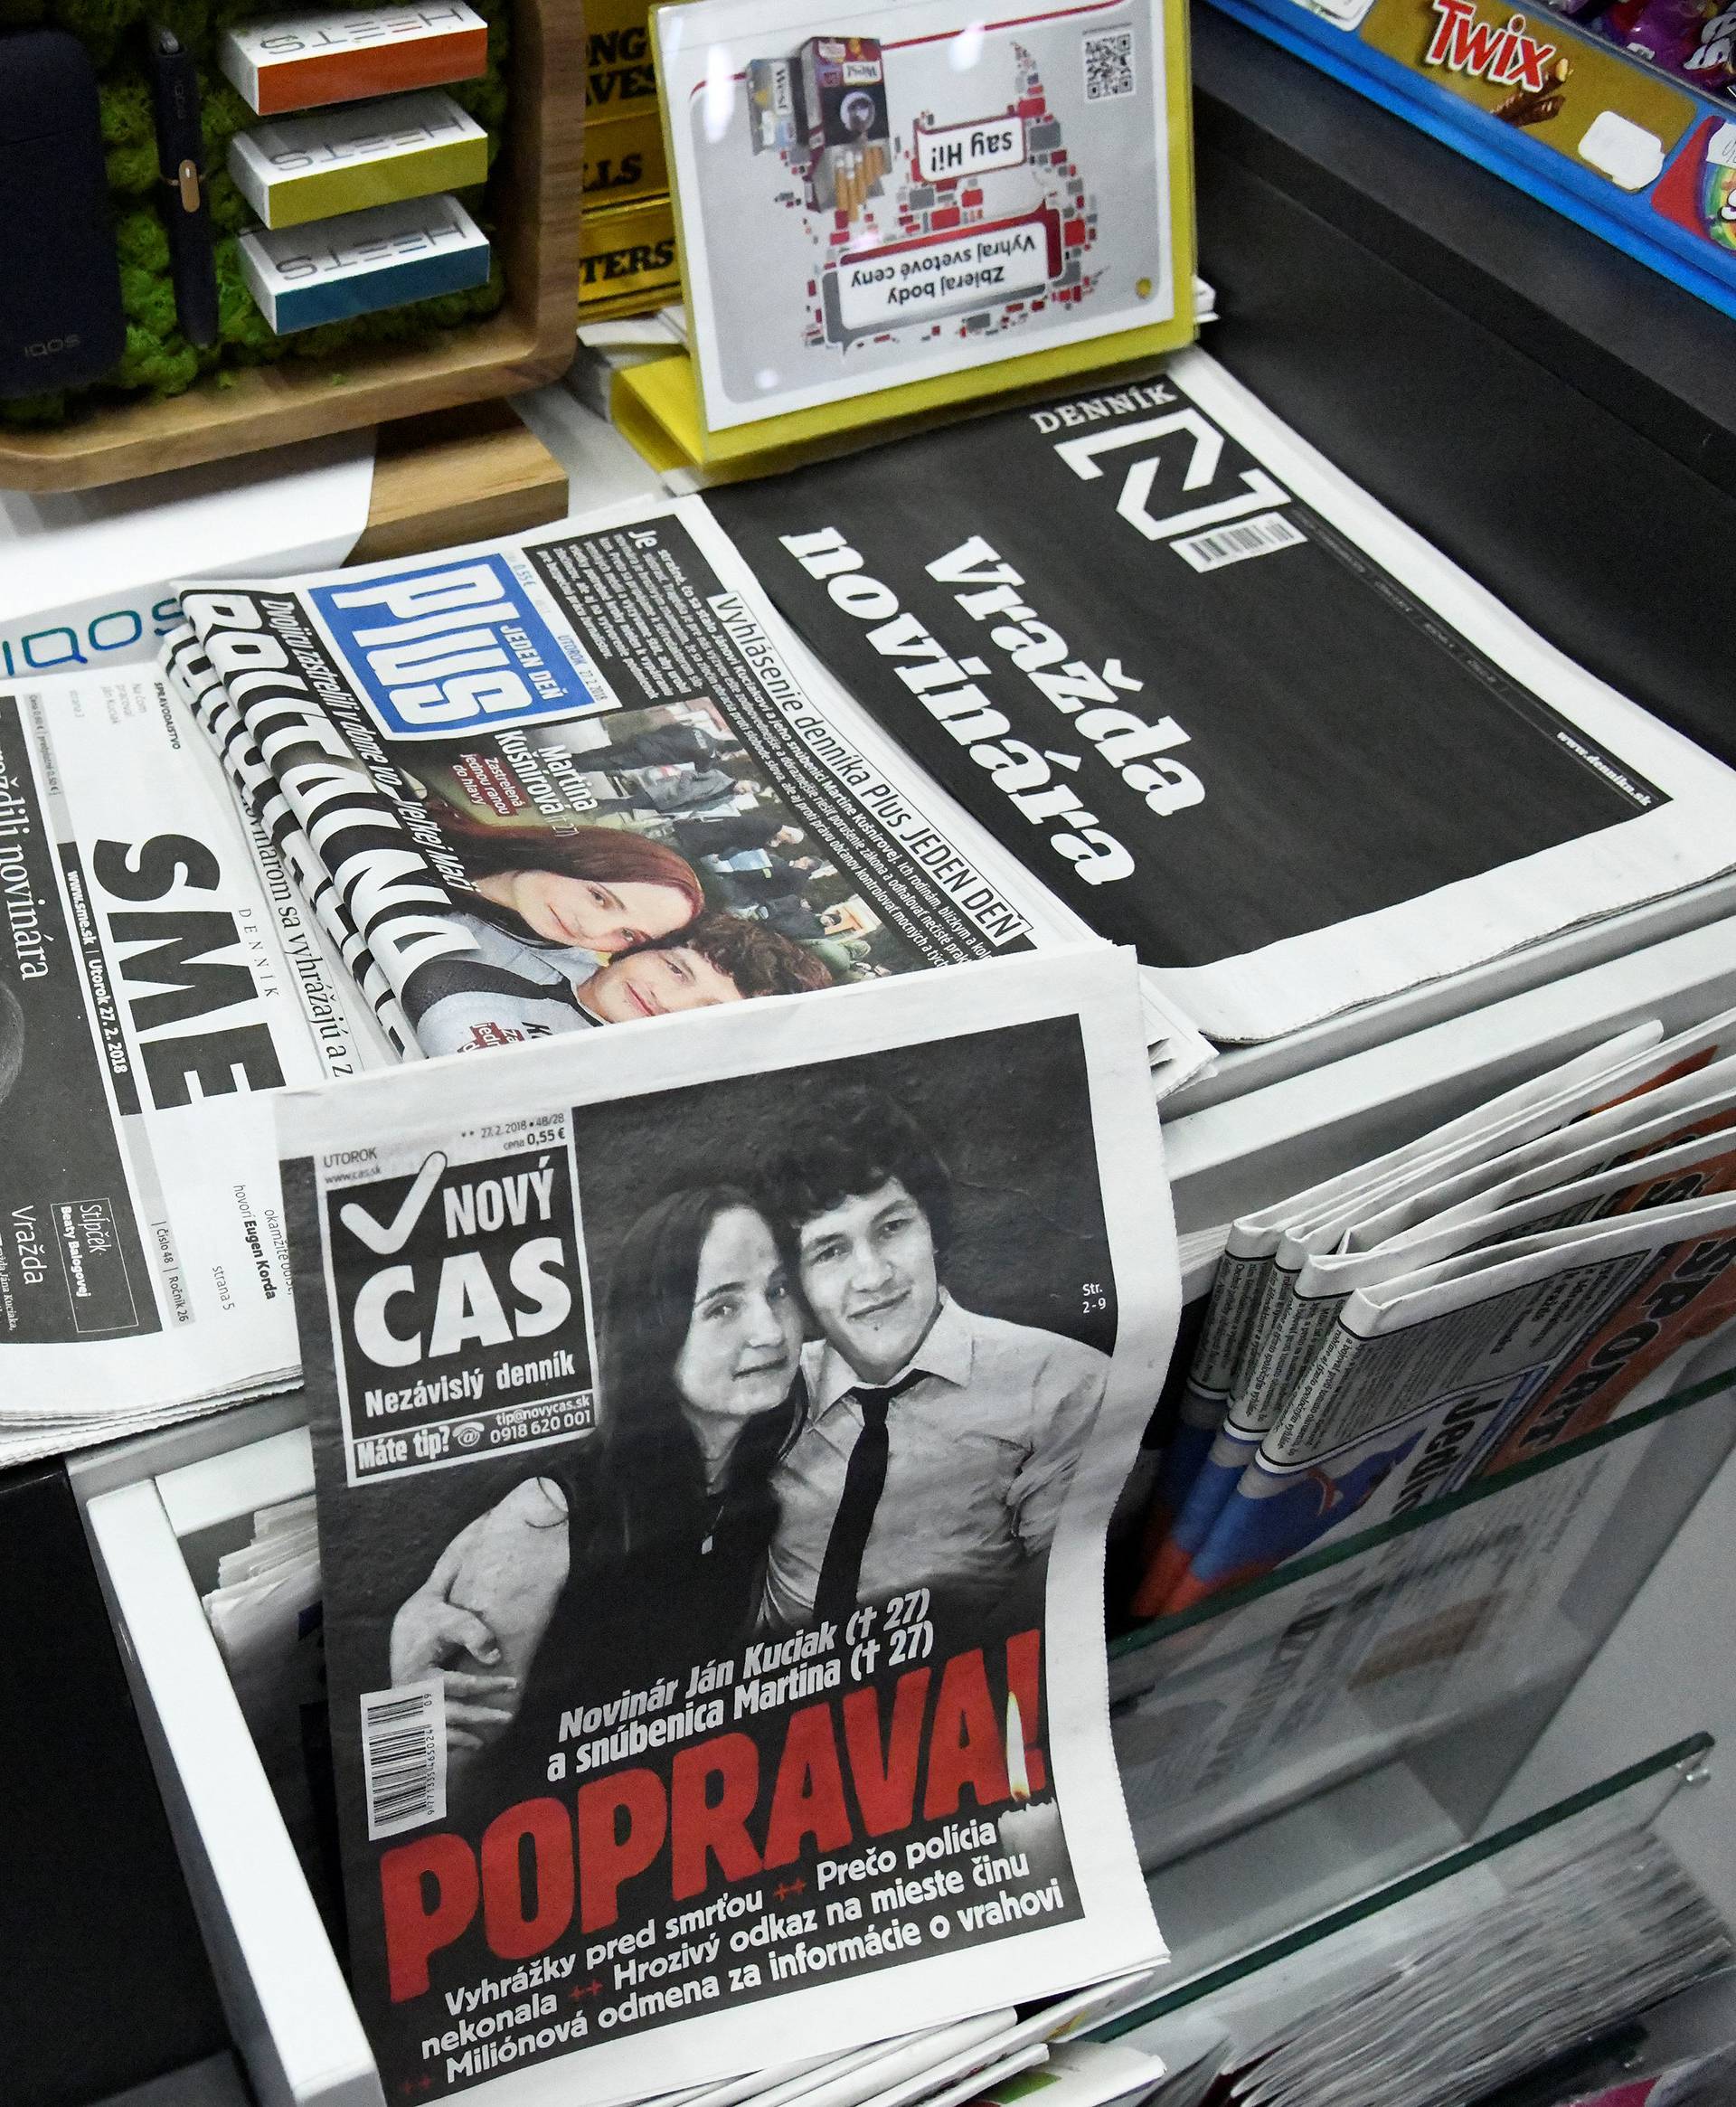 Front pages of Slovak newspapers are seen with headlines about and portraits of murdered Slovak investigative journalist Jan Kuciak and his girlfriend Martina Kusnirova, in a shop in Trnava